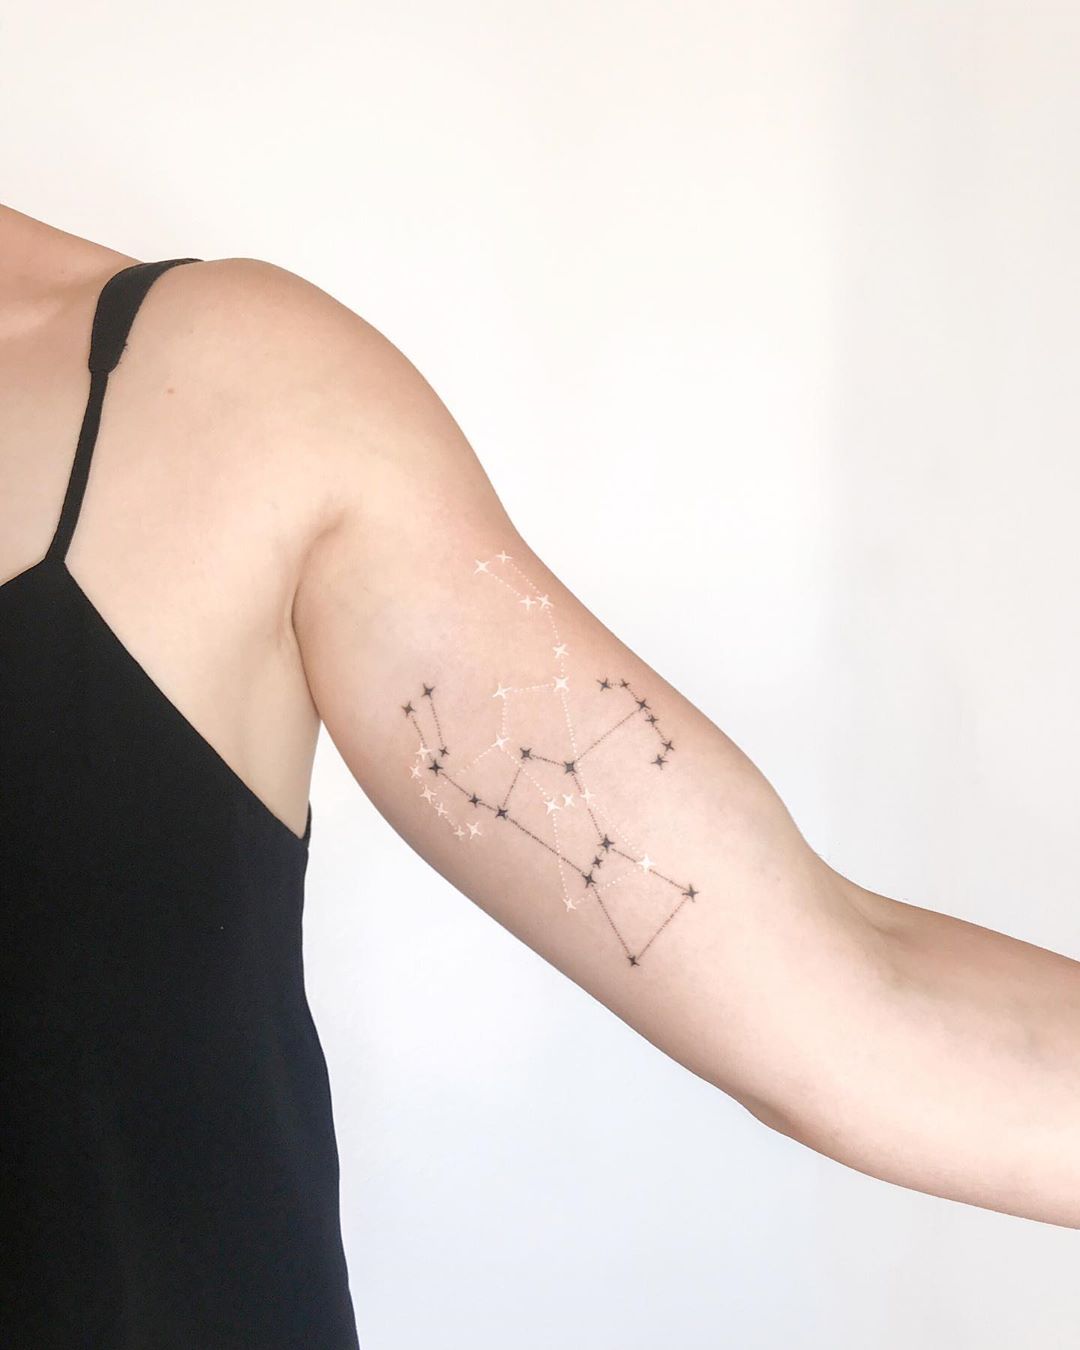 Orion constellation tattoo by Ann Gilberg